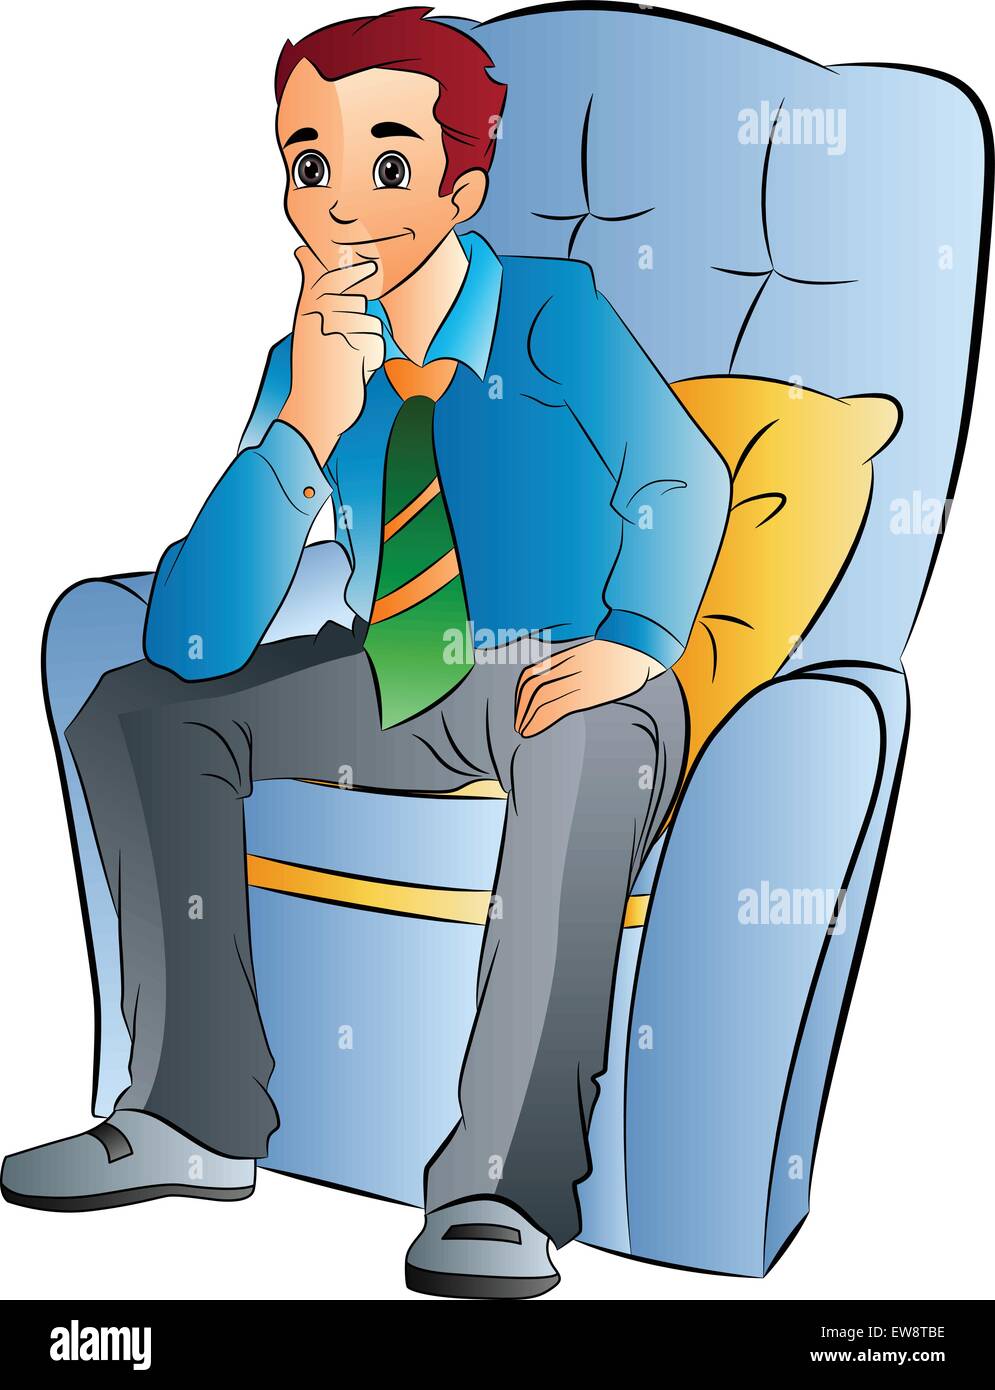 Young Man Sitting on a Soft Chair, vector illustration Stock Vector